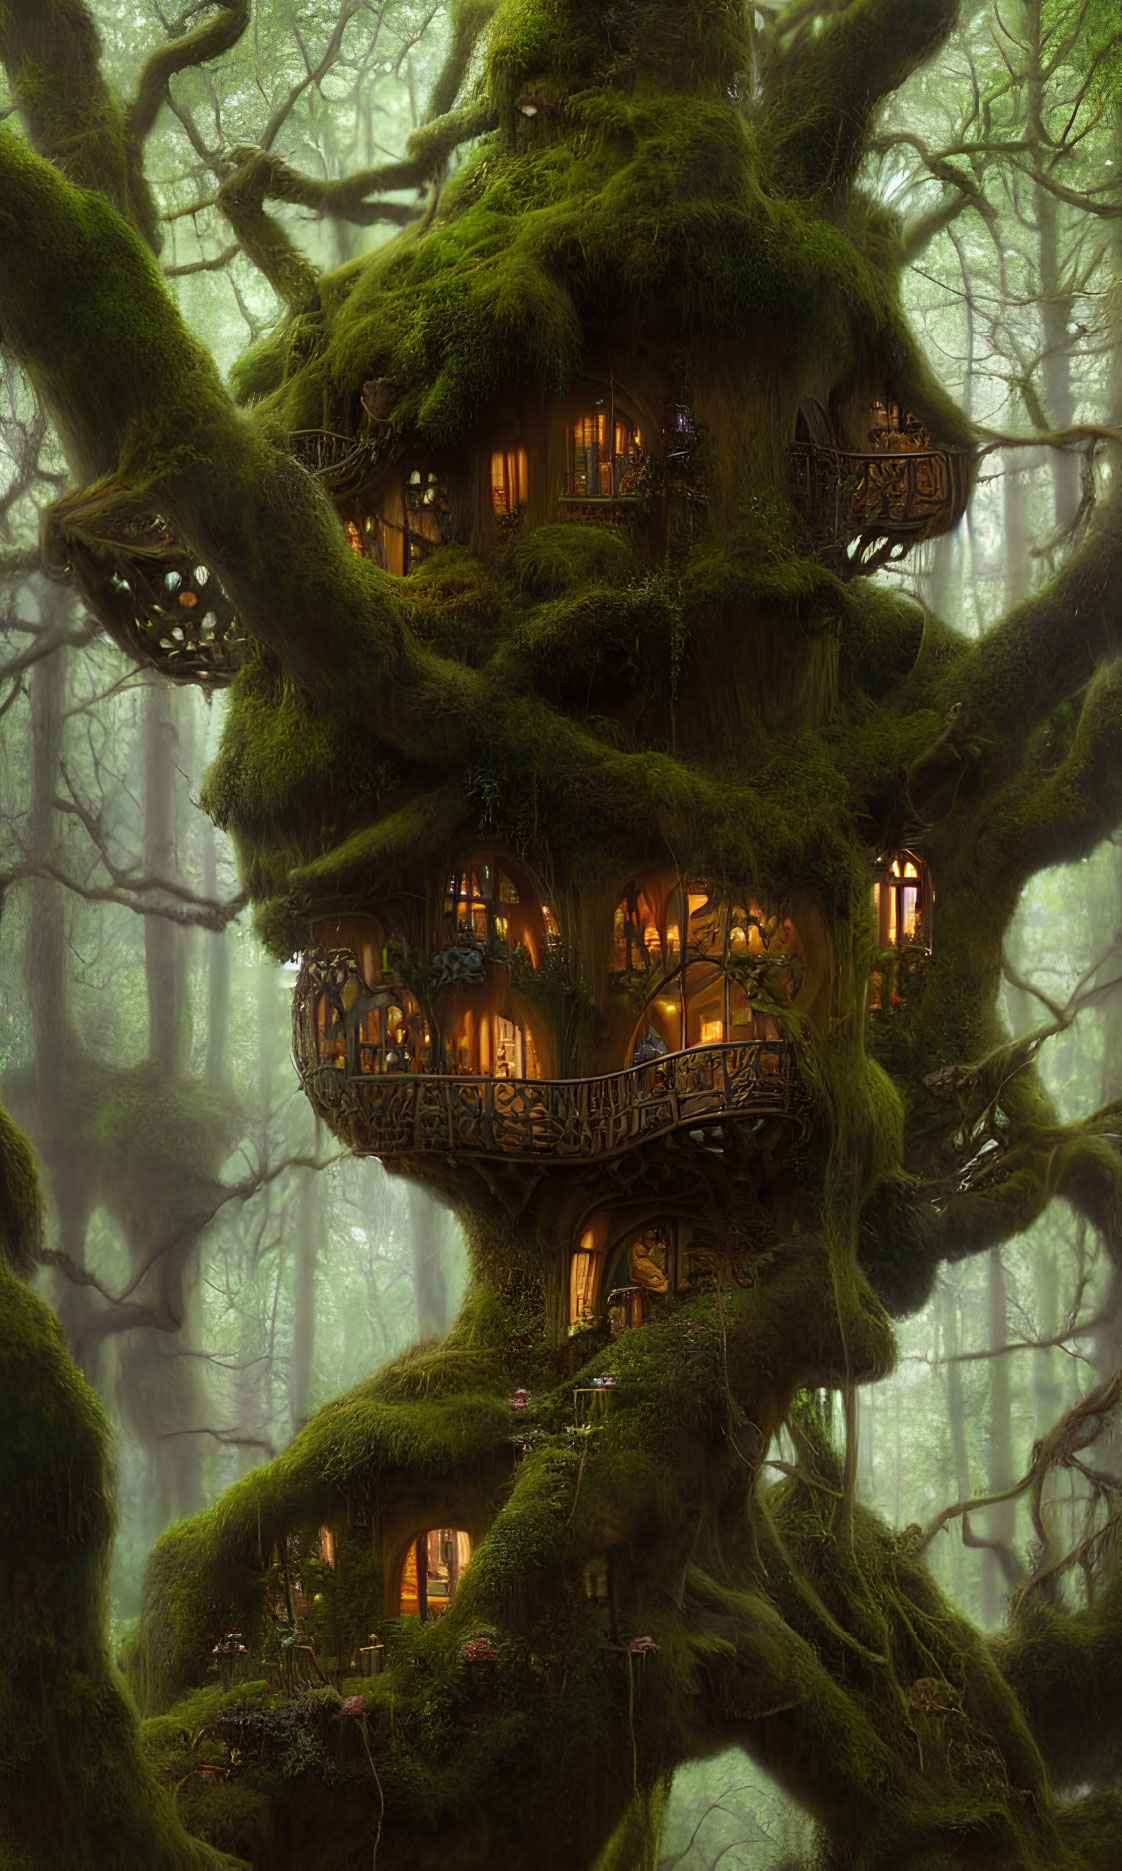 Moss-Covered Treehouse in Mystical Forest with Warm Glowing Lights